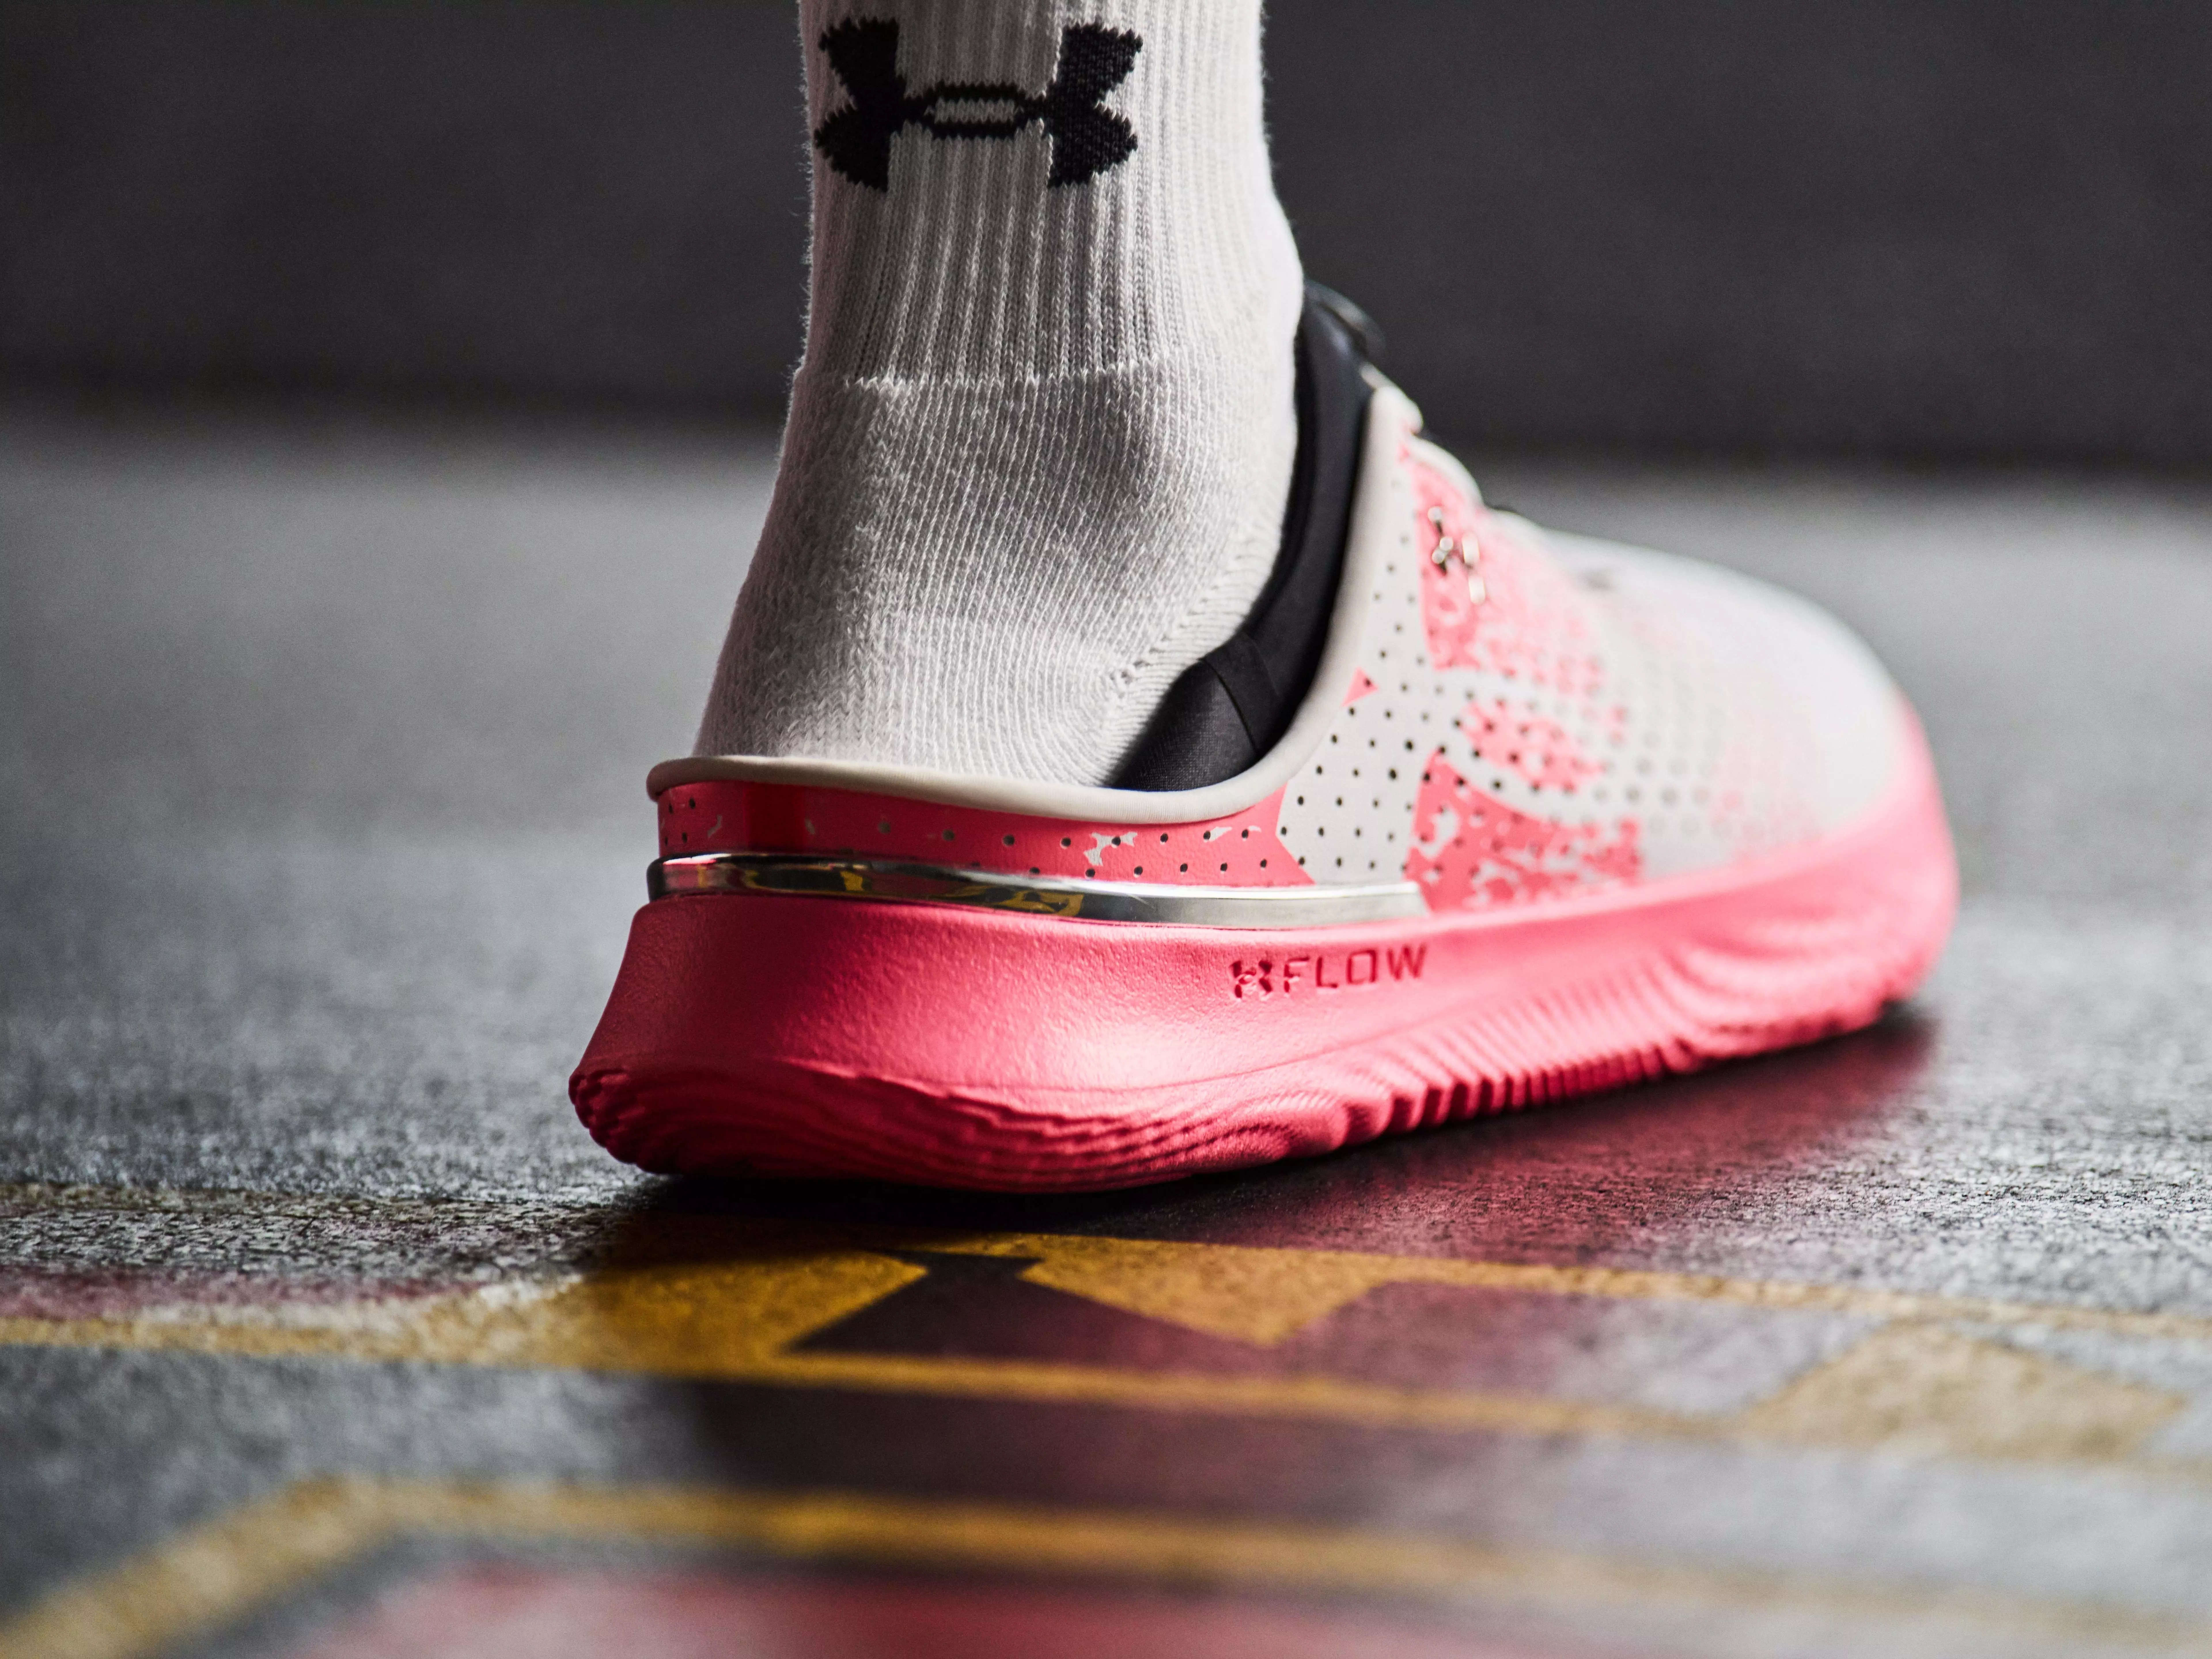 Samengesteld Afleiding ruimte Under Armour is targeting Gen Z athletes with a shoe that's part training  sneaker and part slip-on shoe | Business Insider India